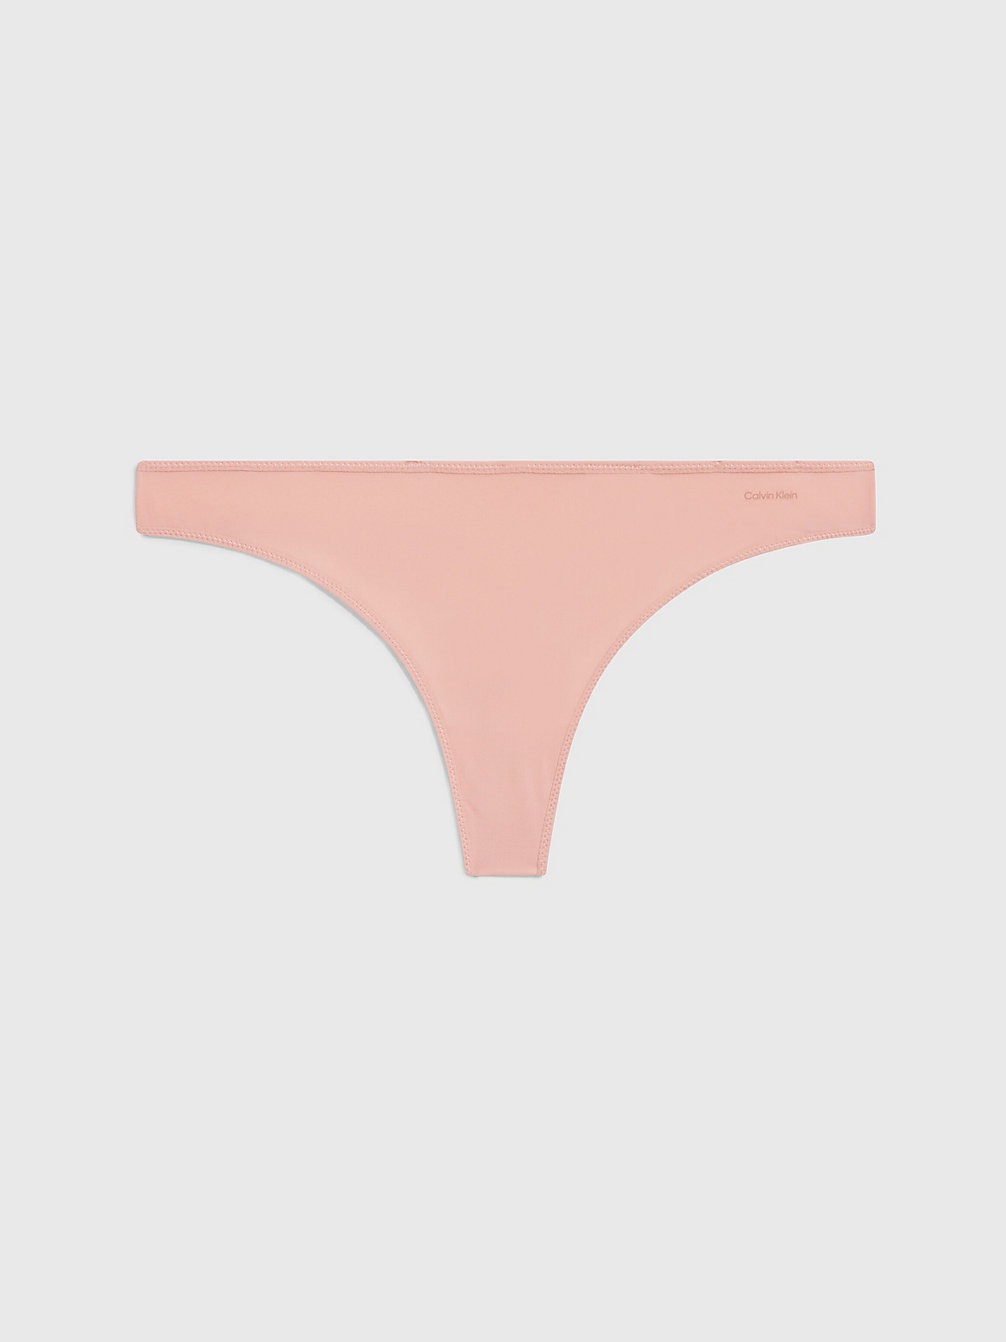 SUBDUED Thong - Sheer Marquisette undefined women Calvin Klein